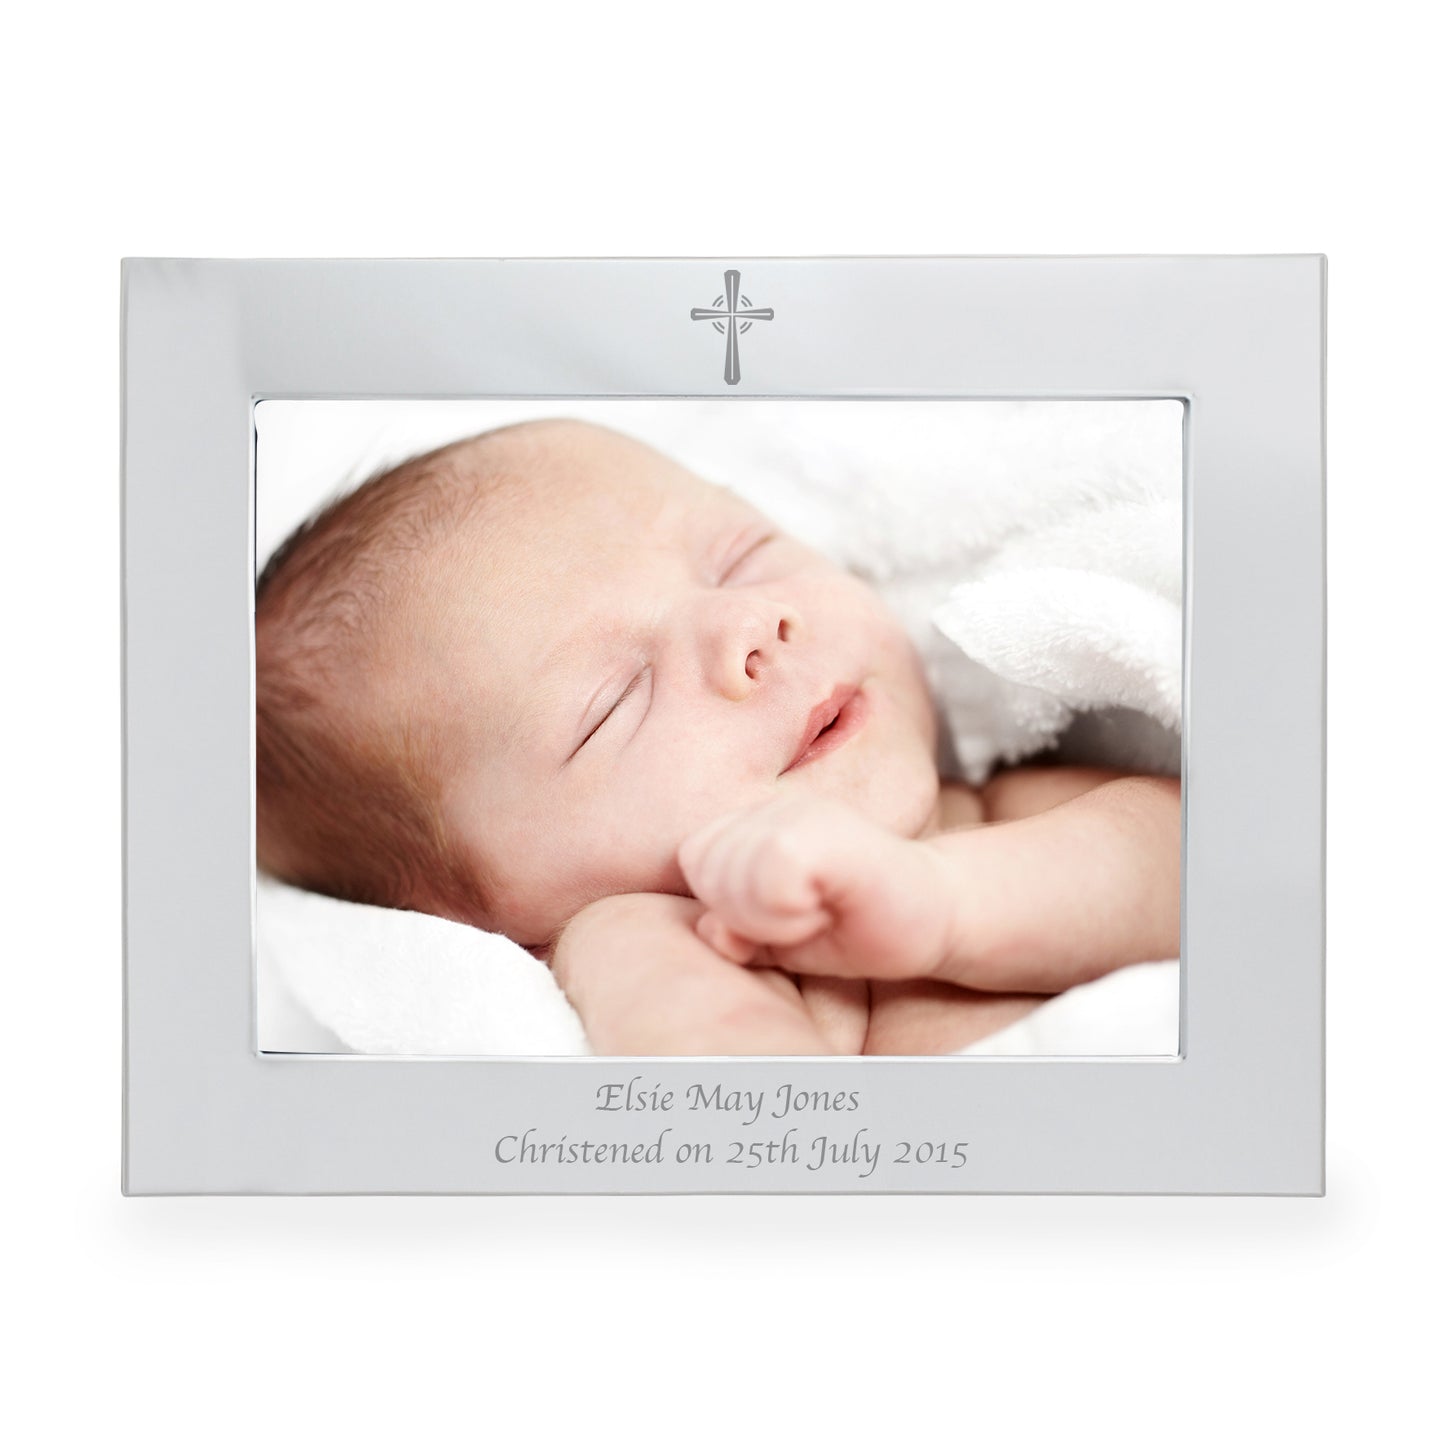 Personalised Silver 7x5 Landscape Cross Photo Frame - Personalise It!